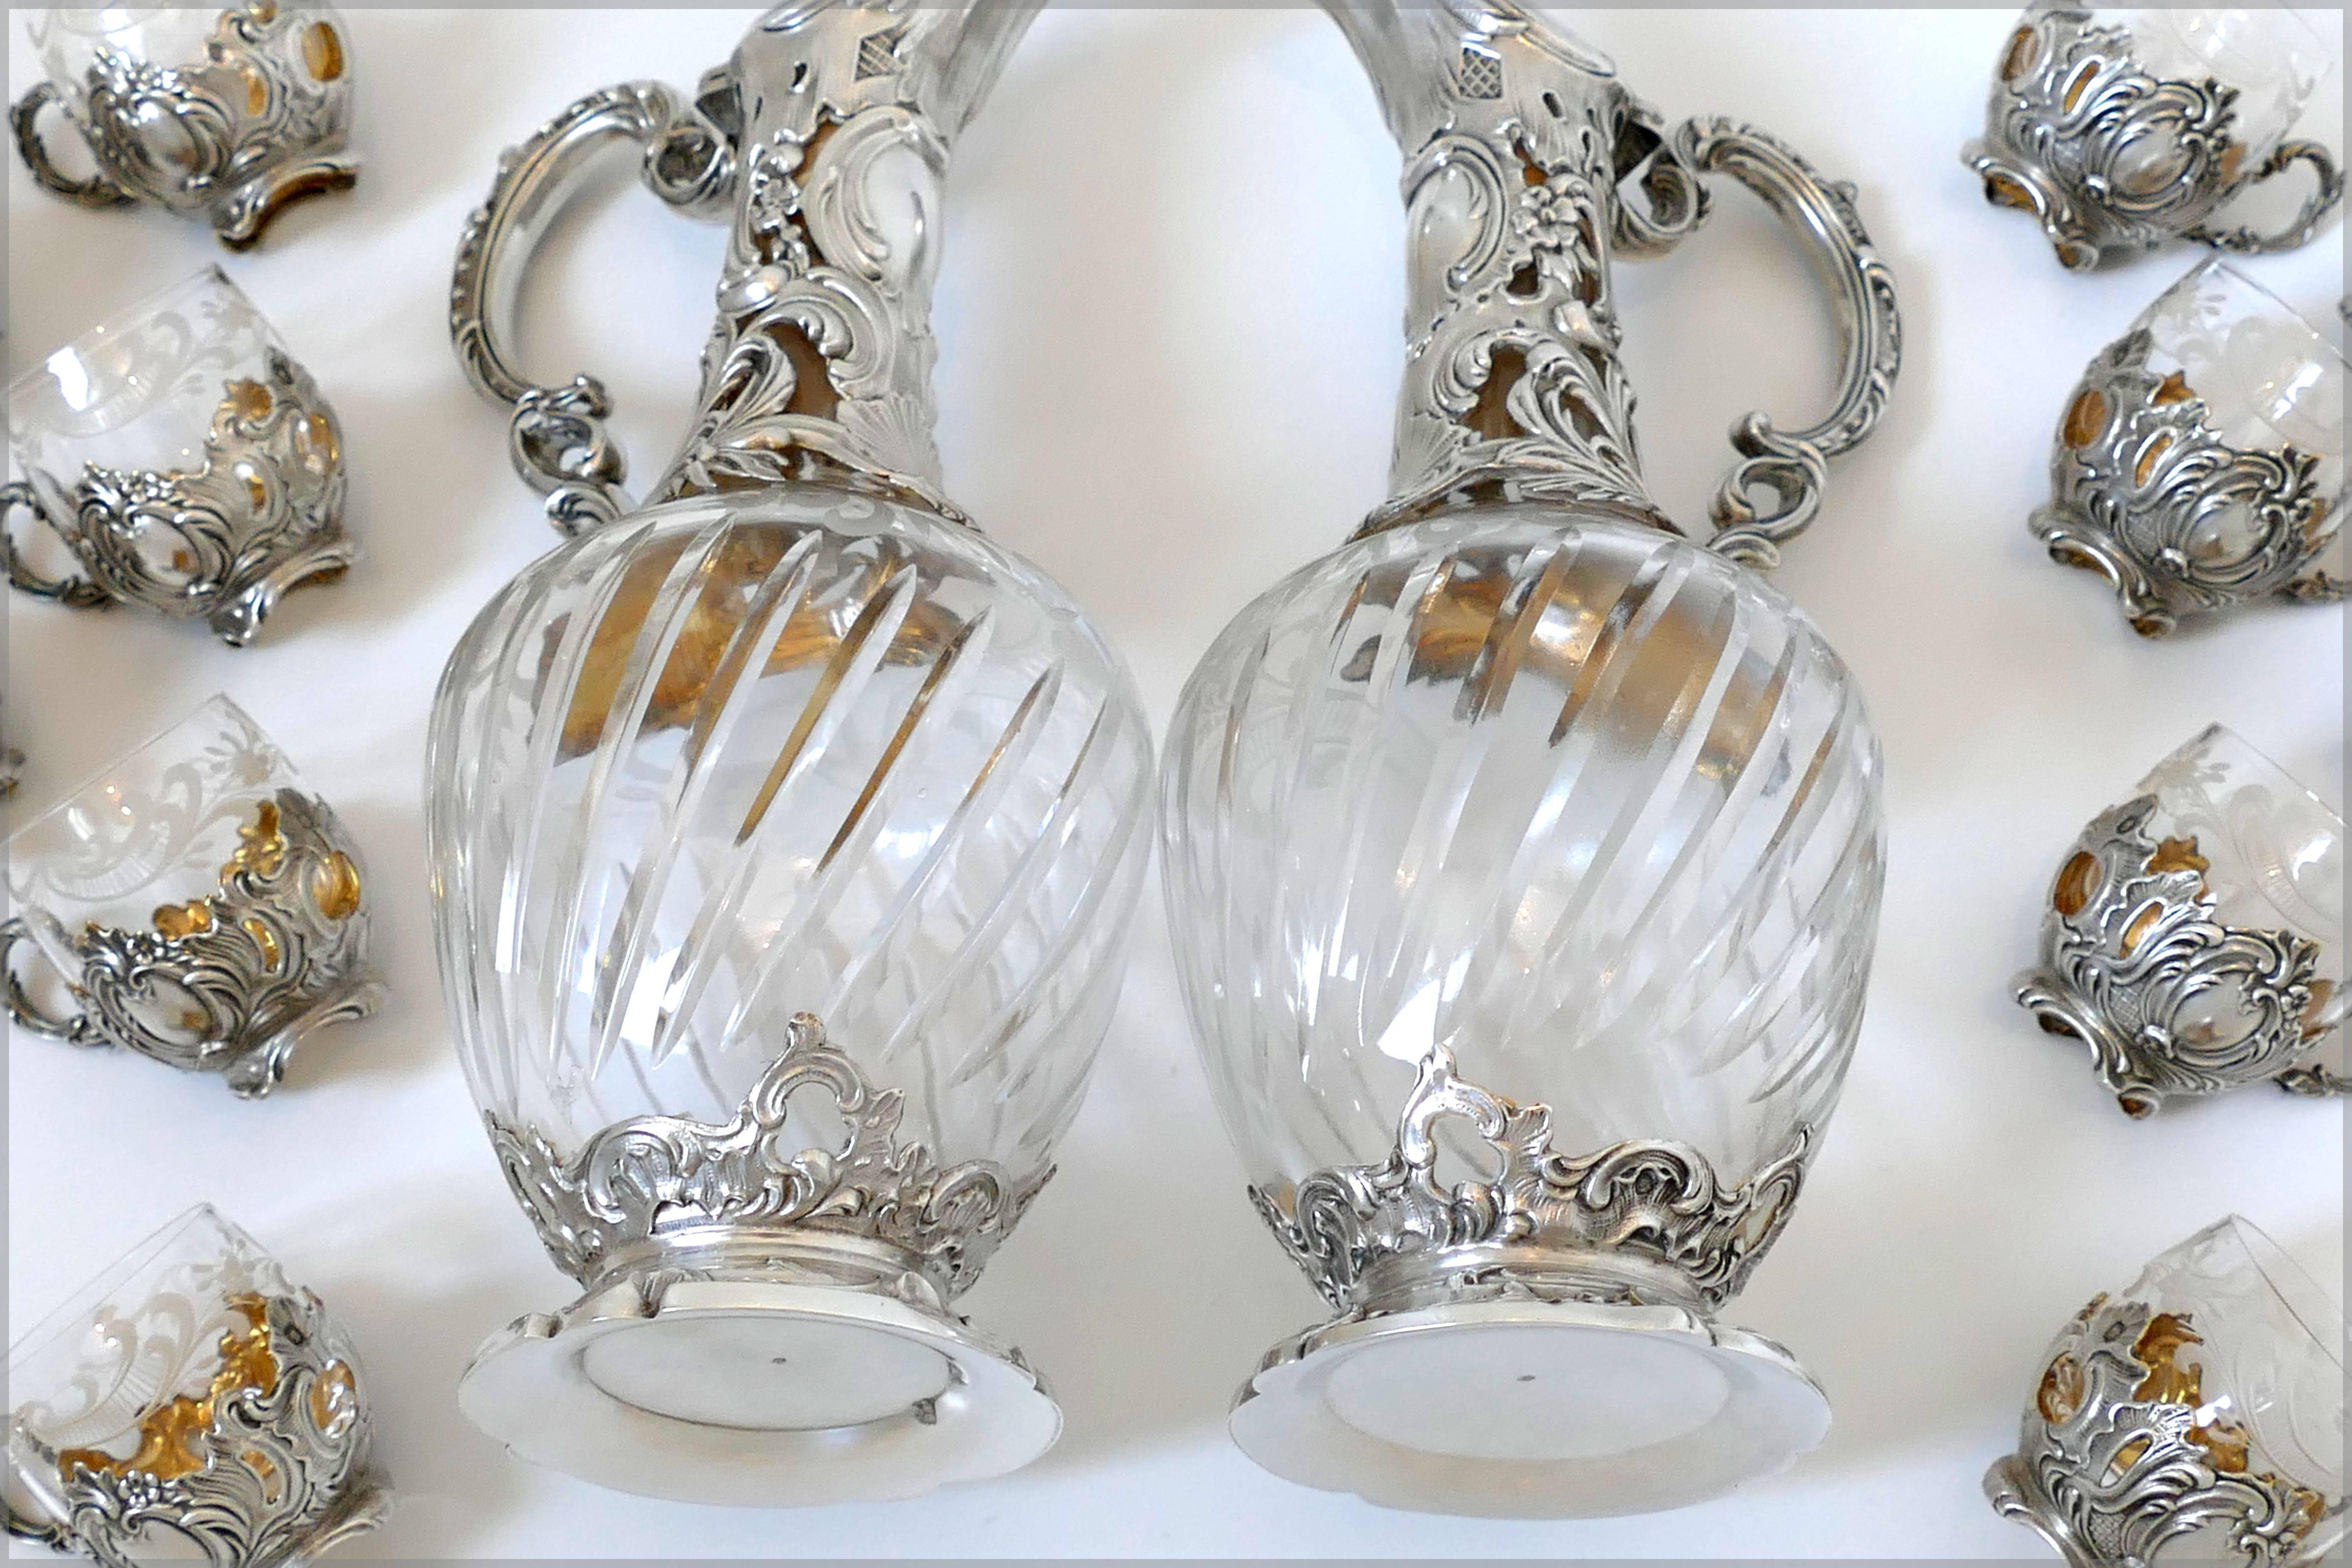 Late 19th Century Rare French Sterling Silver 18k Gold Liquor Set 14 Pc, Decanter Pair, Glasses For Sale